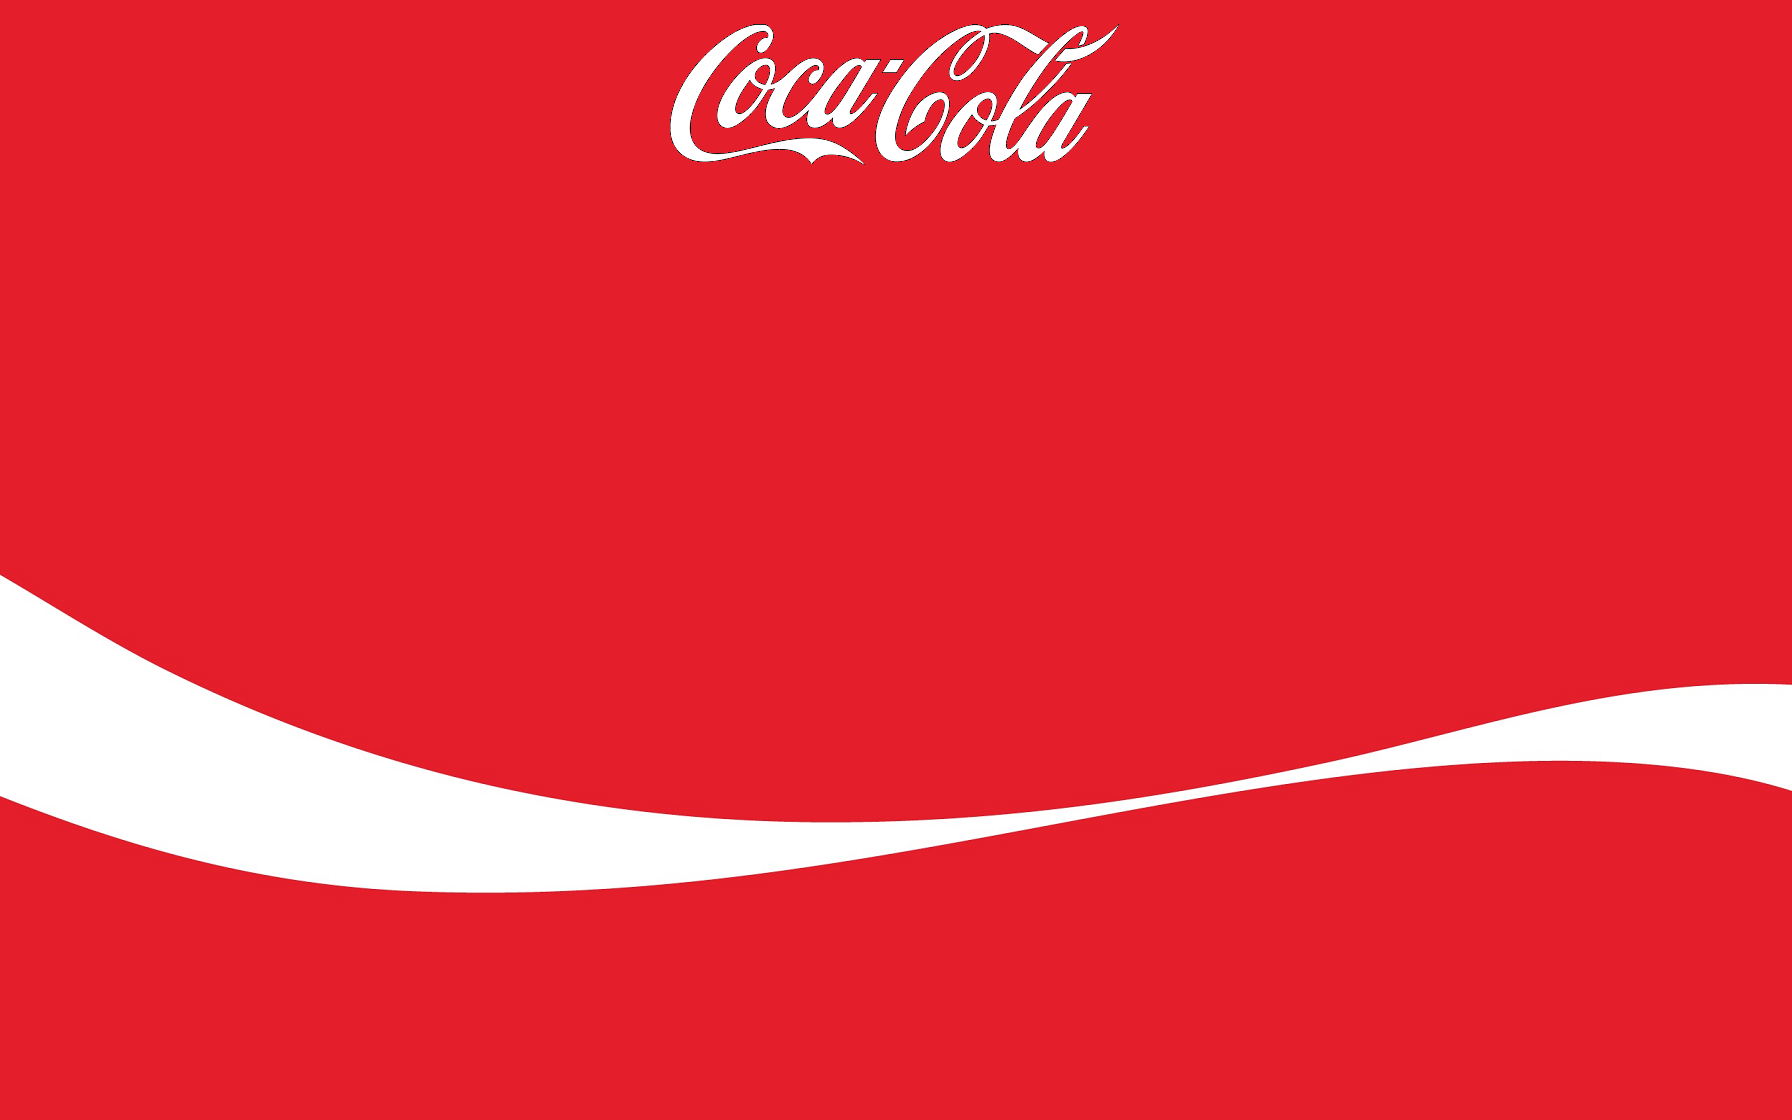 Coca Cola Logo On A Red Background